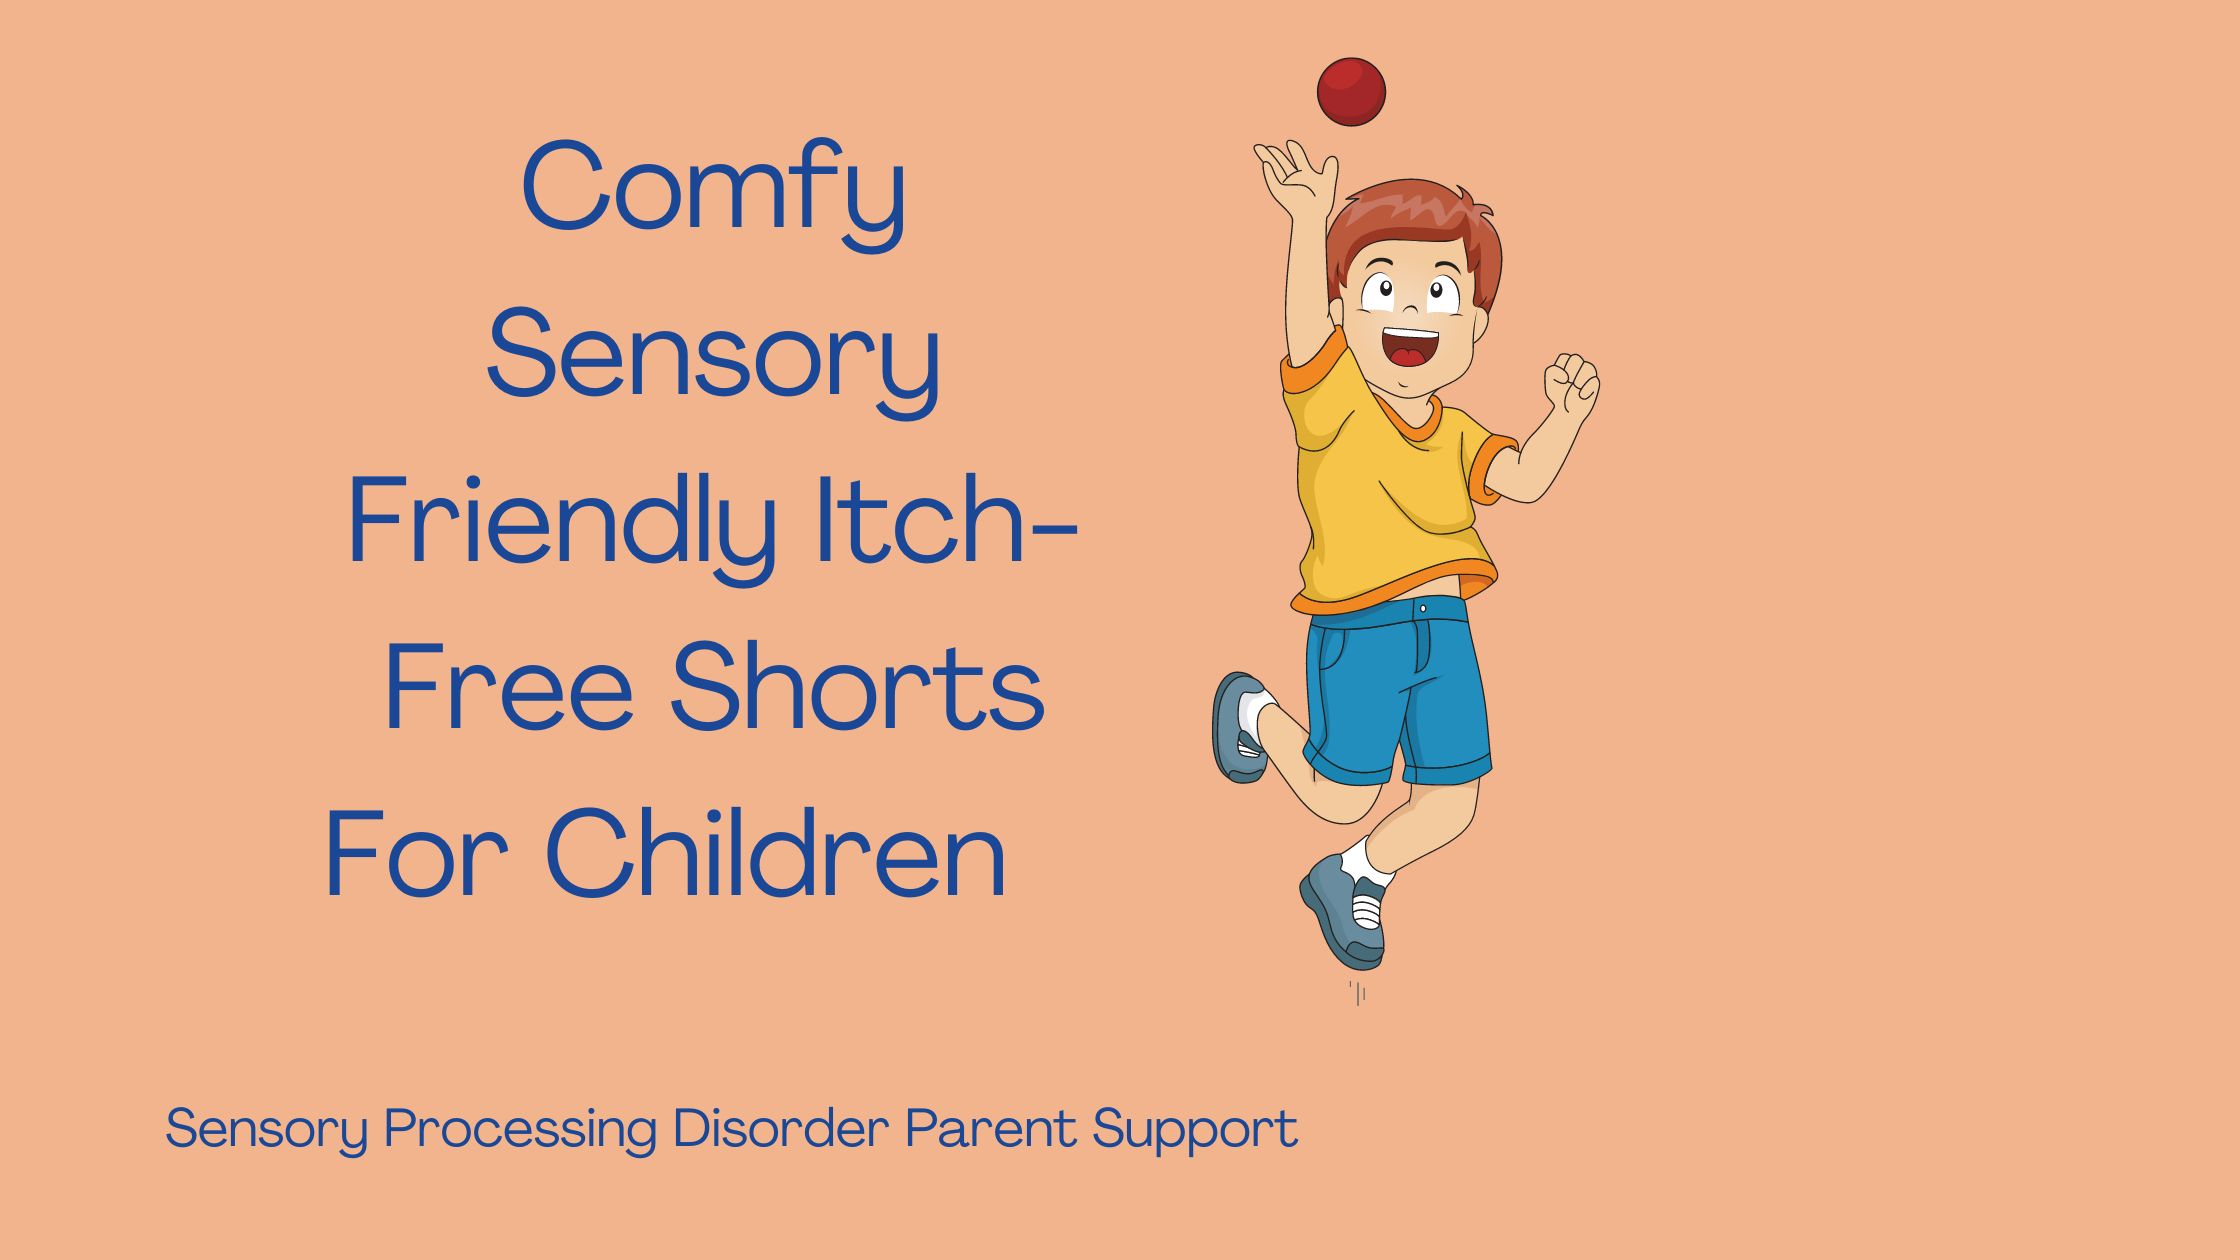 child with sensory processing disorder wearing sensory friendly shorts  playing ball Comfy Sensory Friendly Itch-Free Shorts For Children